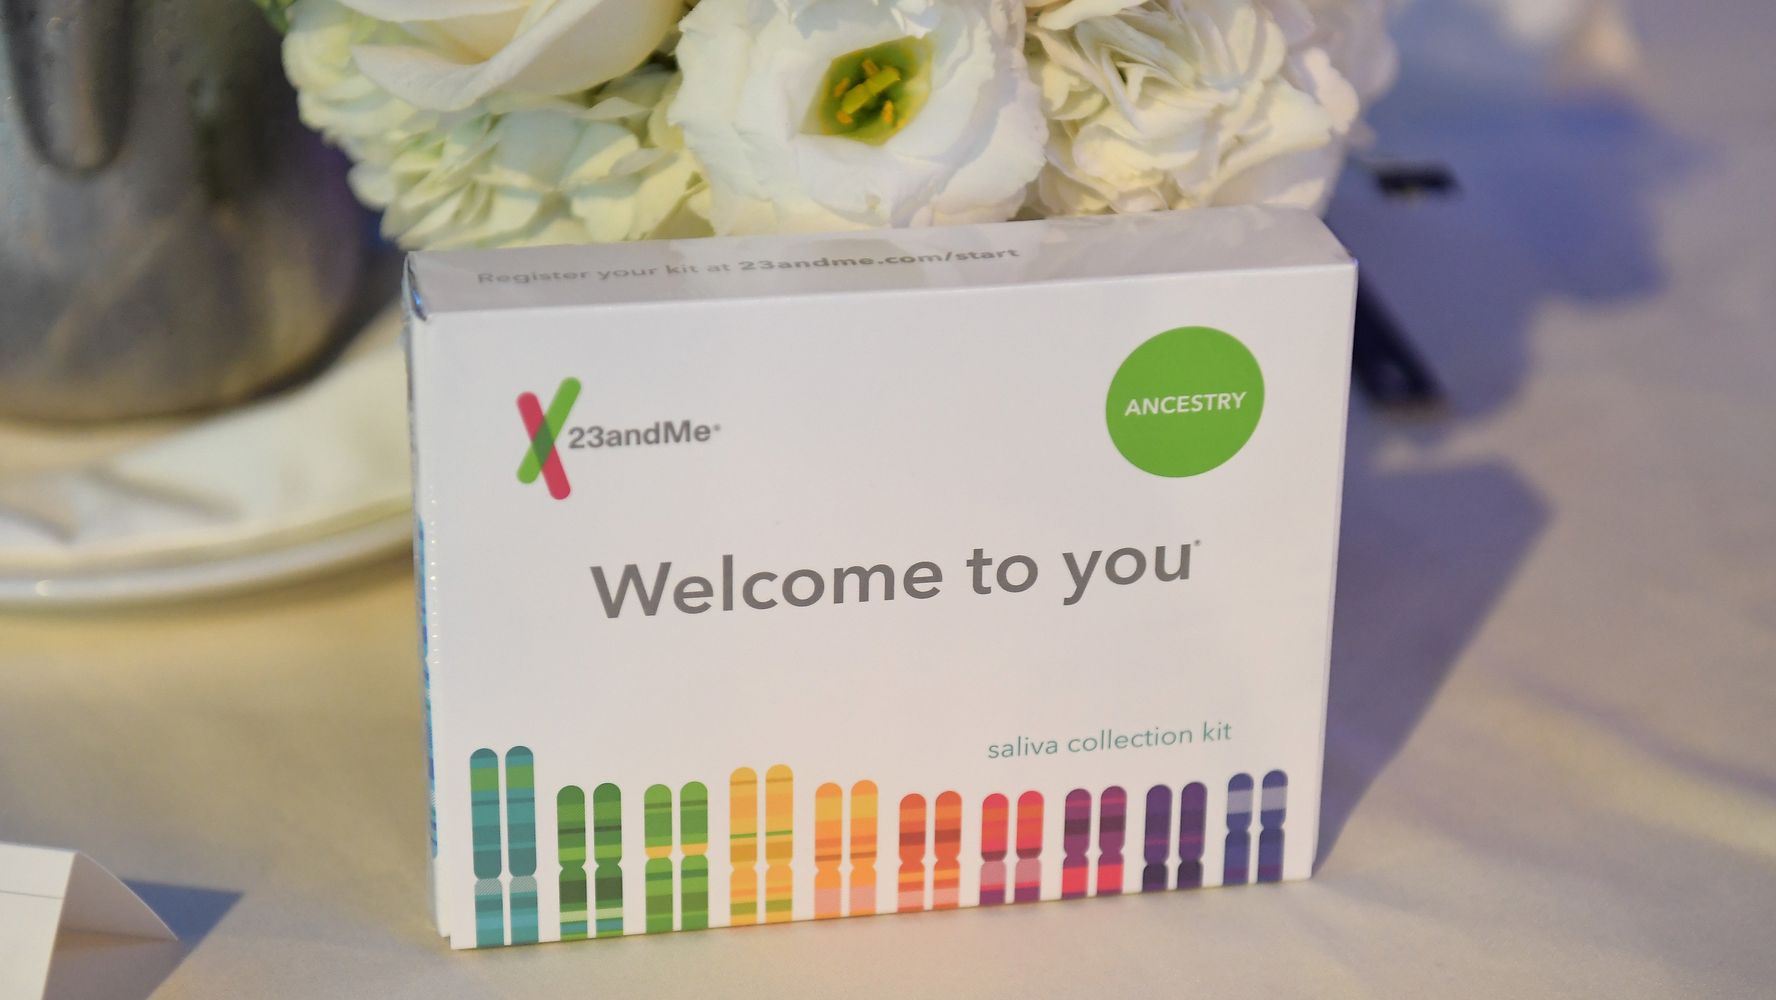 Ancestry answered the DNA questions 23andMe couldn't